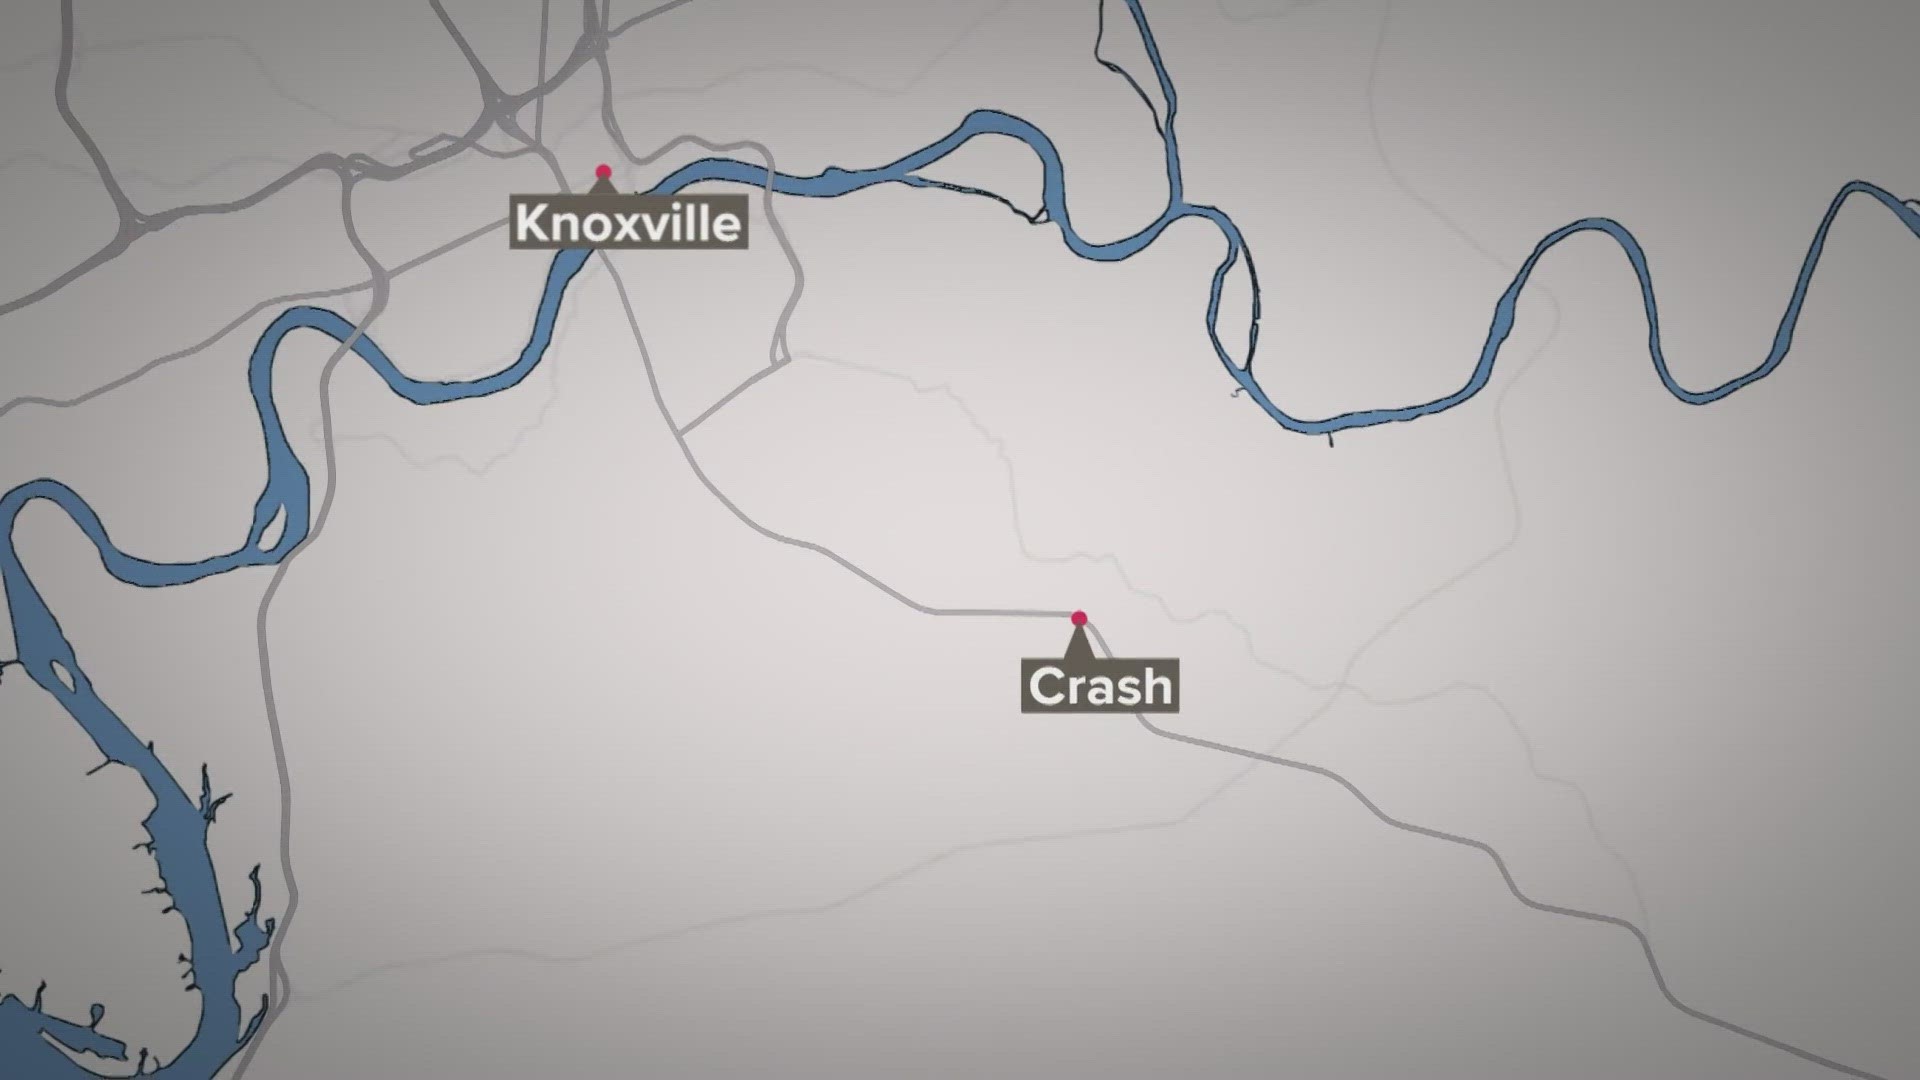 Chapman Highway near John Sevier Highway closed after a South Knoxville crash on Tuesday.